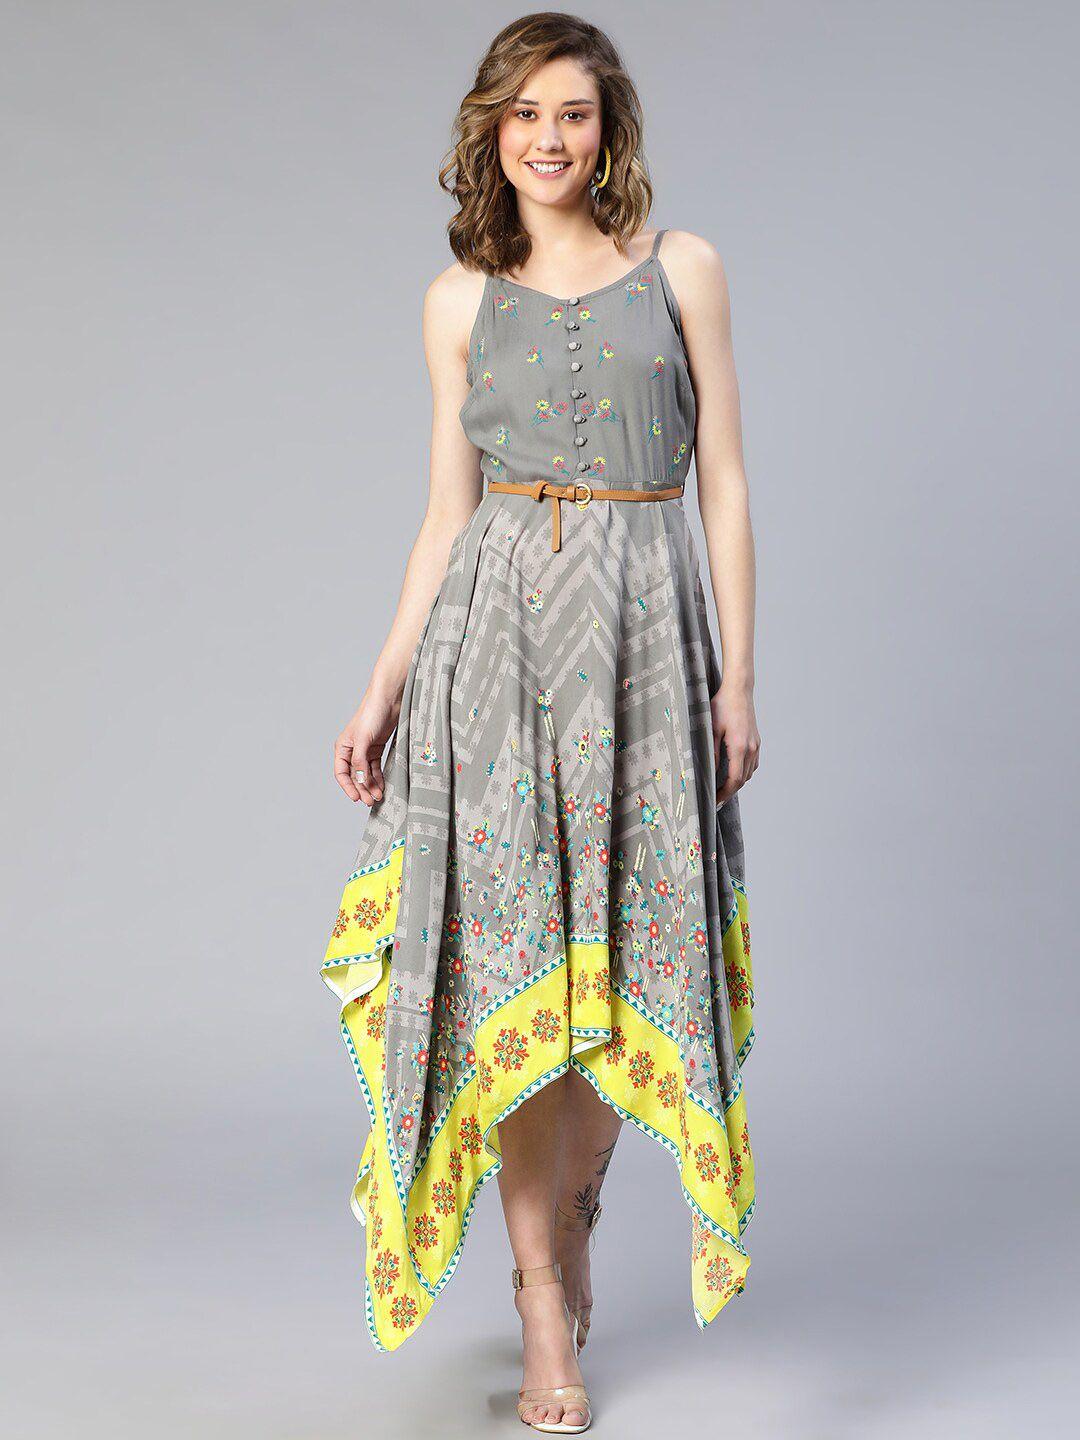 oxolloxo floral printed asymmetric maxi dress with belt